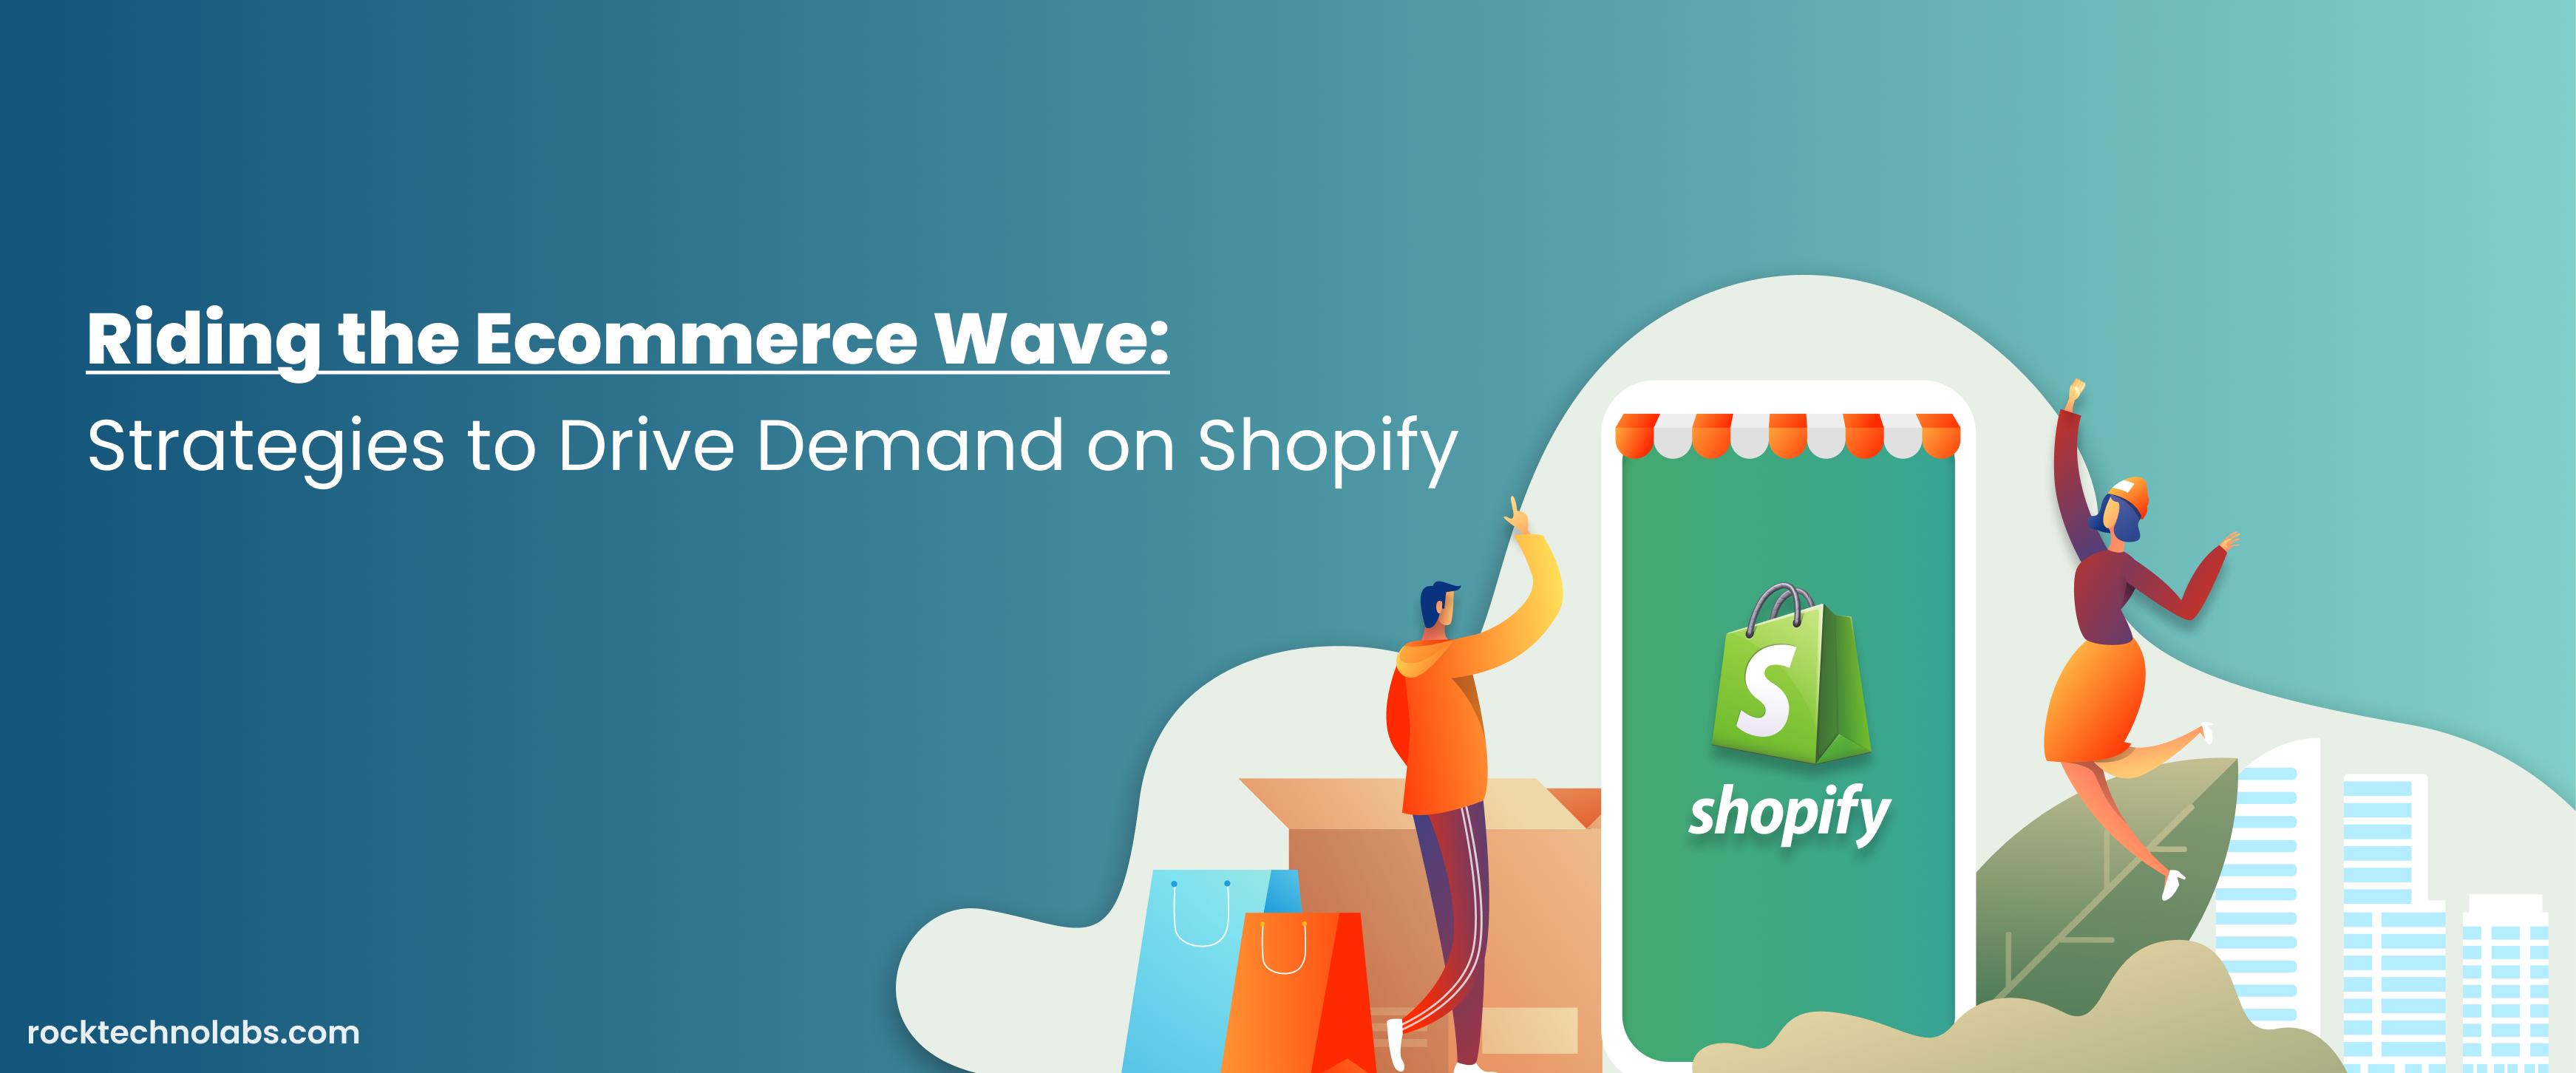 Riding the Ecommerce Wave_ Strategies to Drive Demand on Shopify